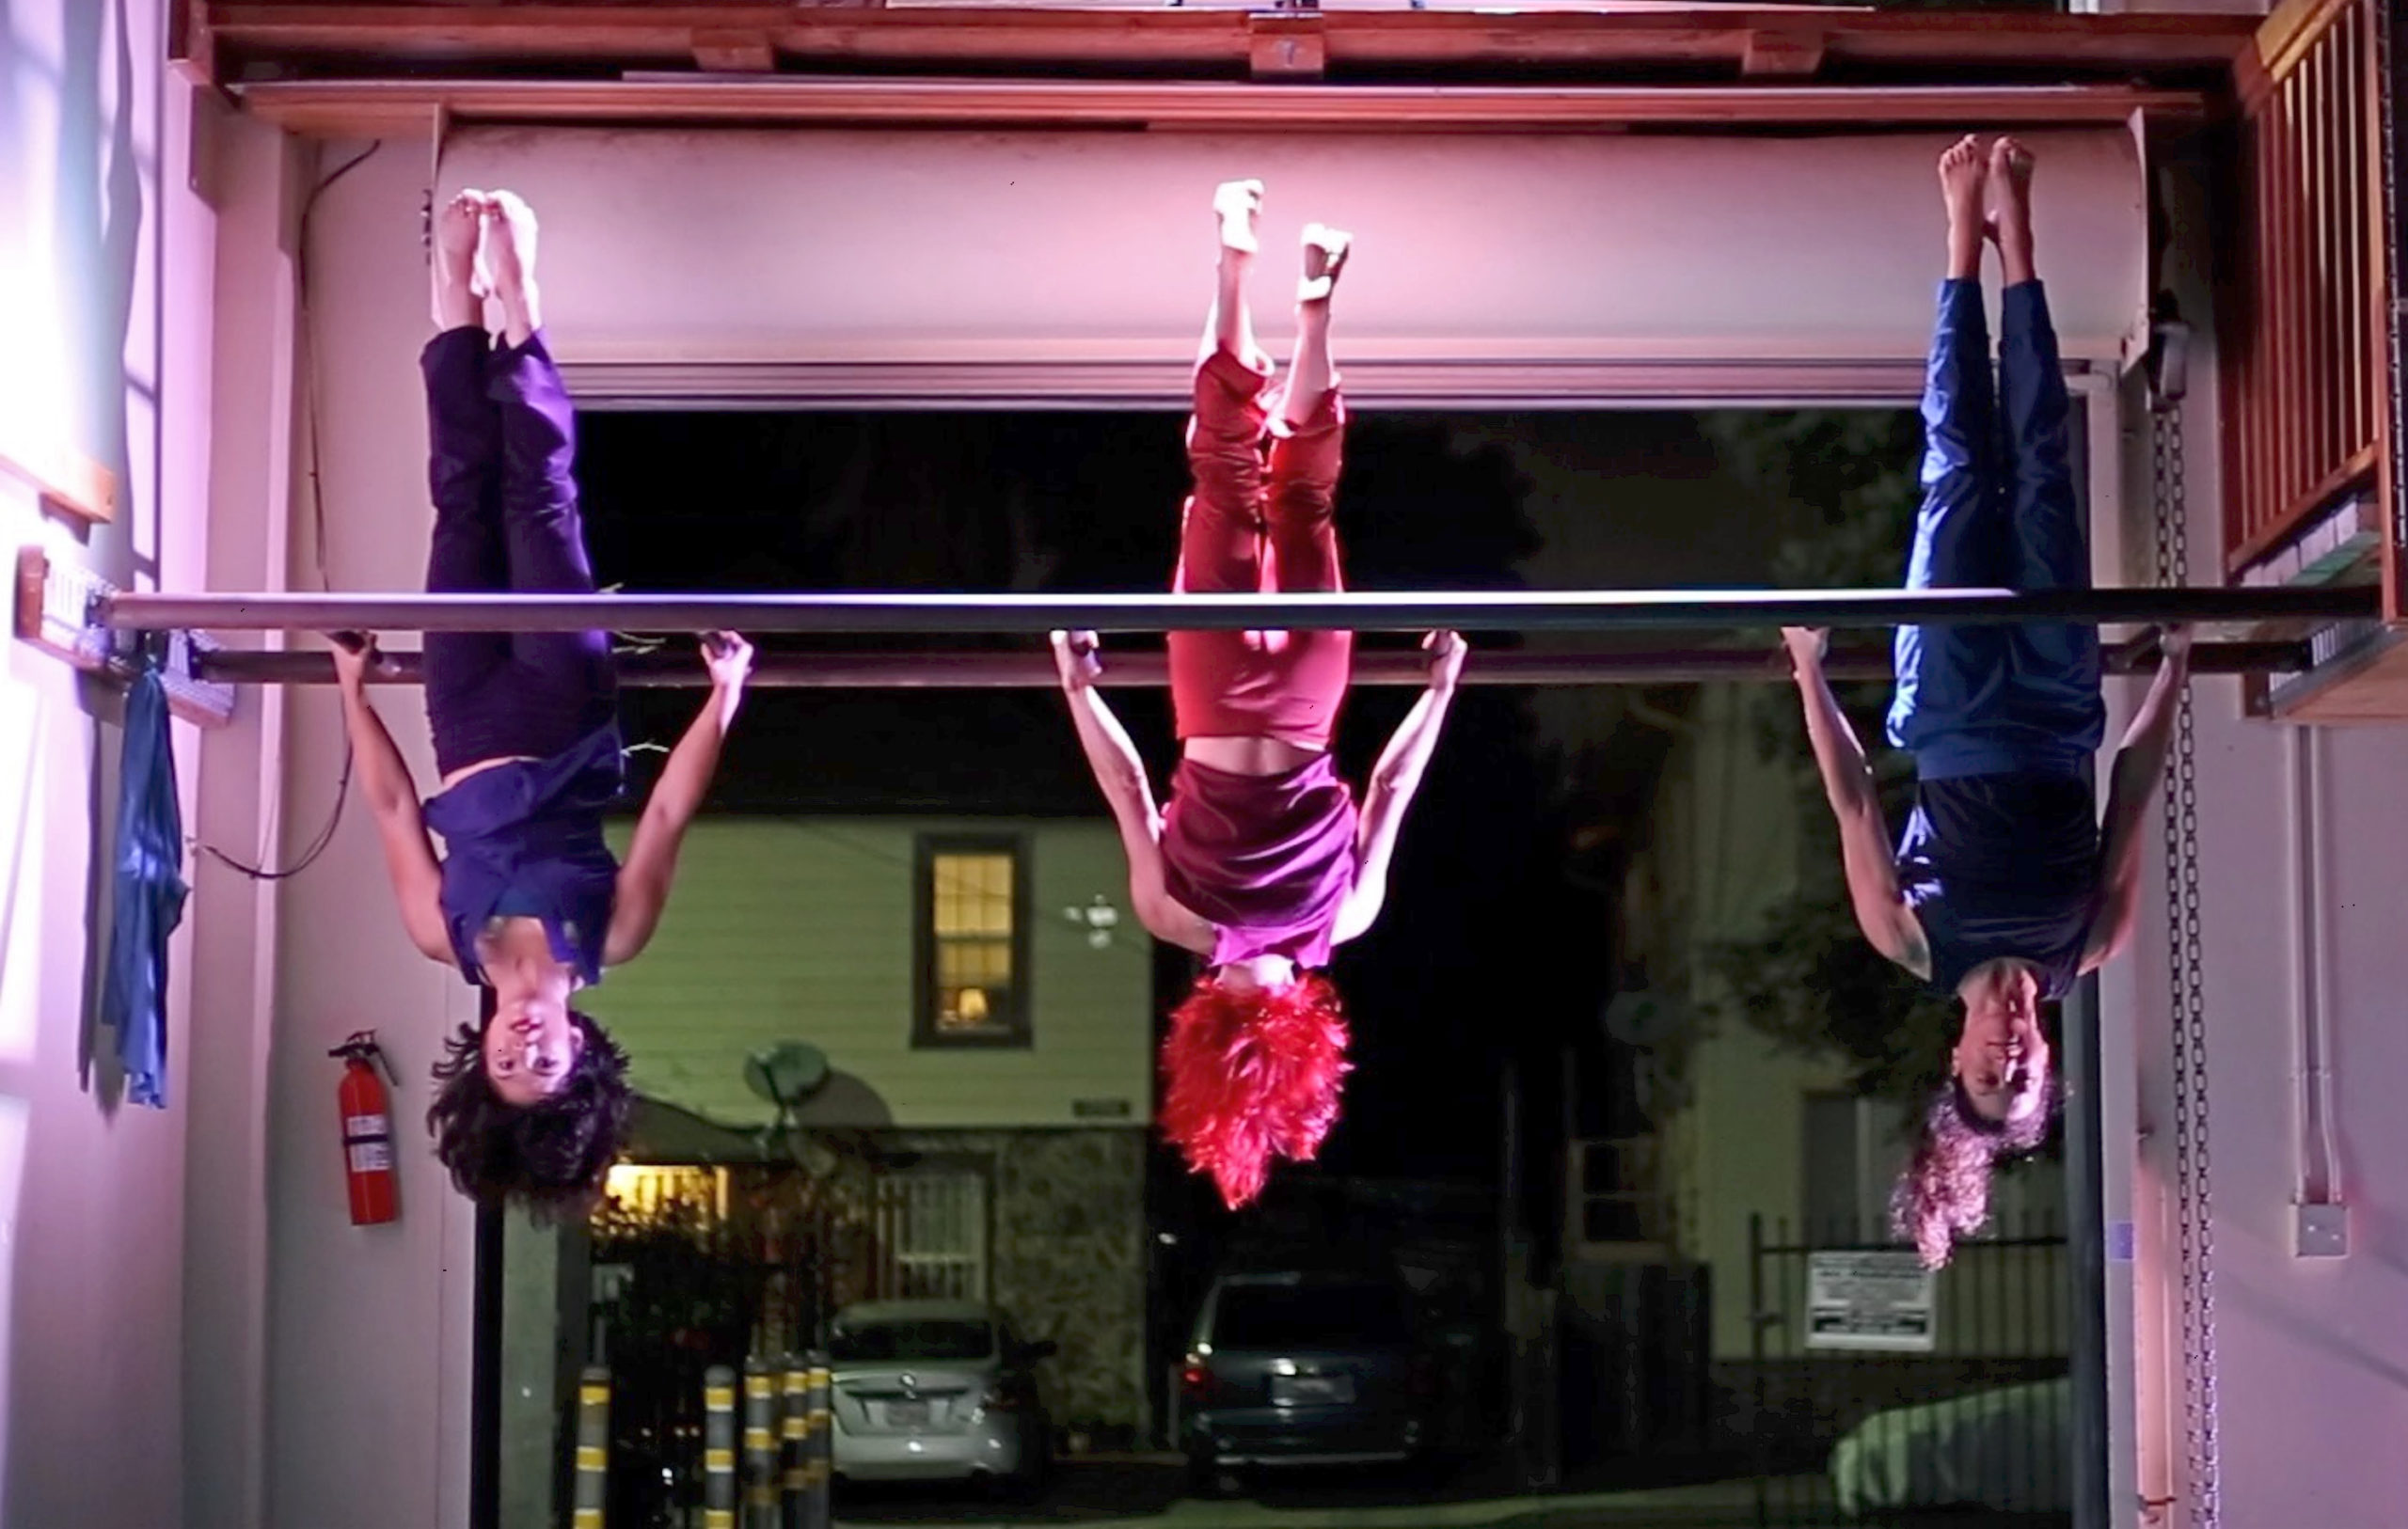 3 dancers hanging from a pole inside a studio